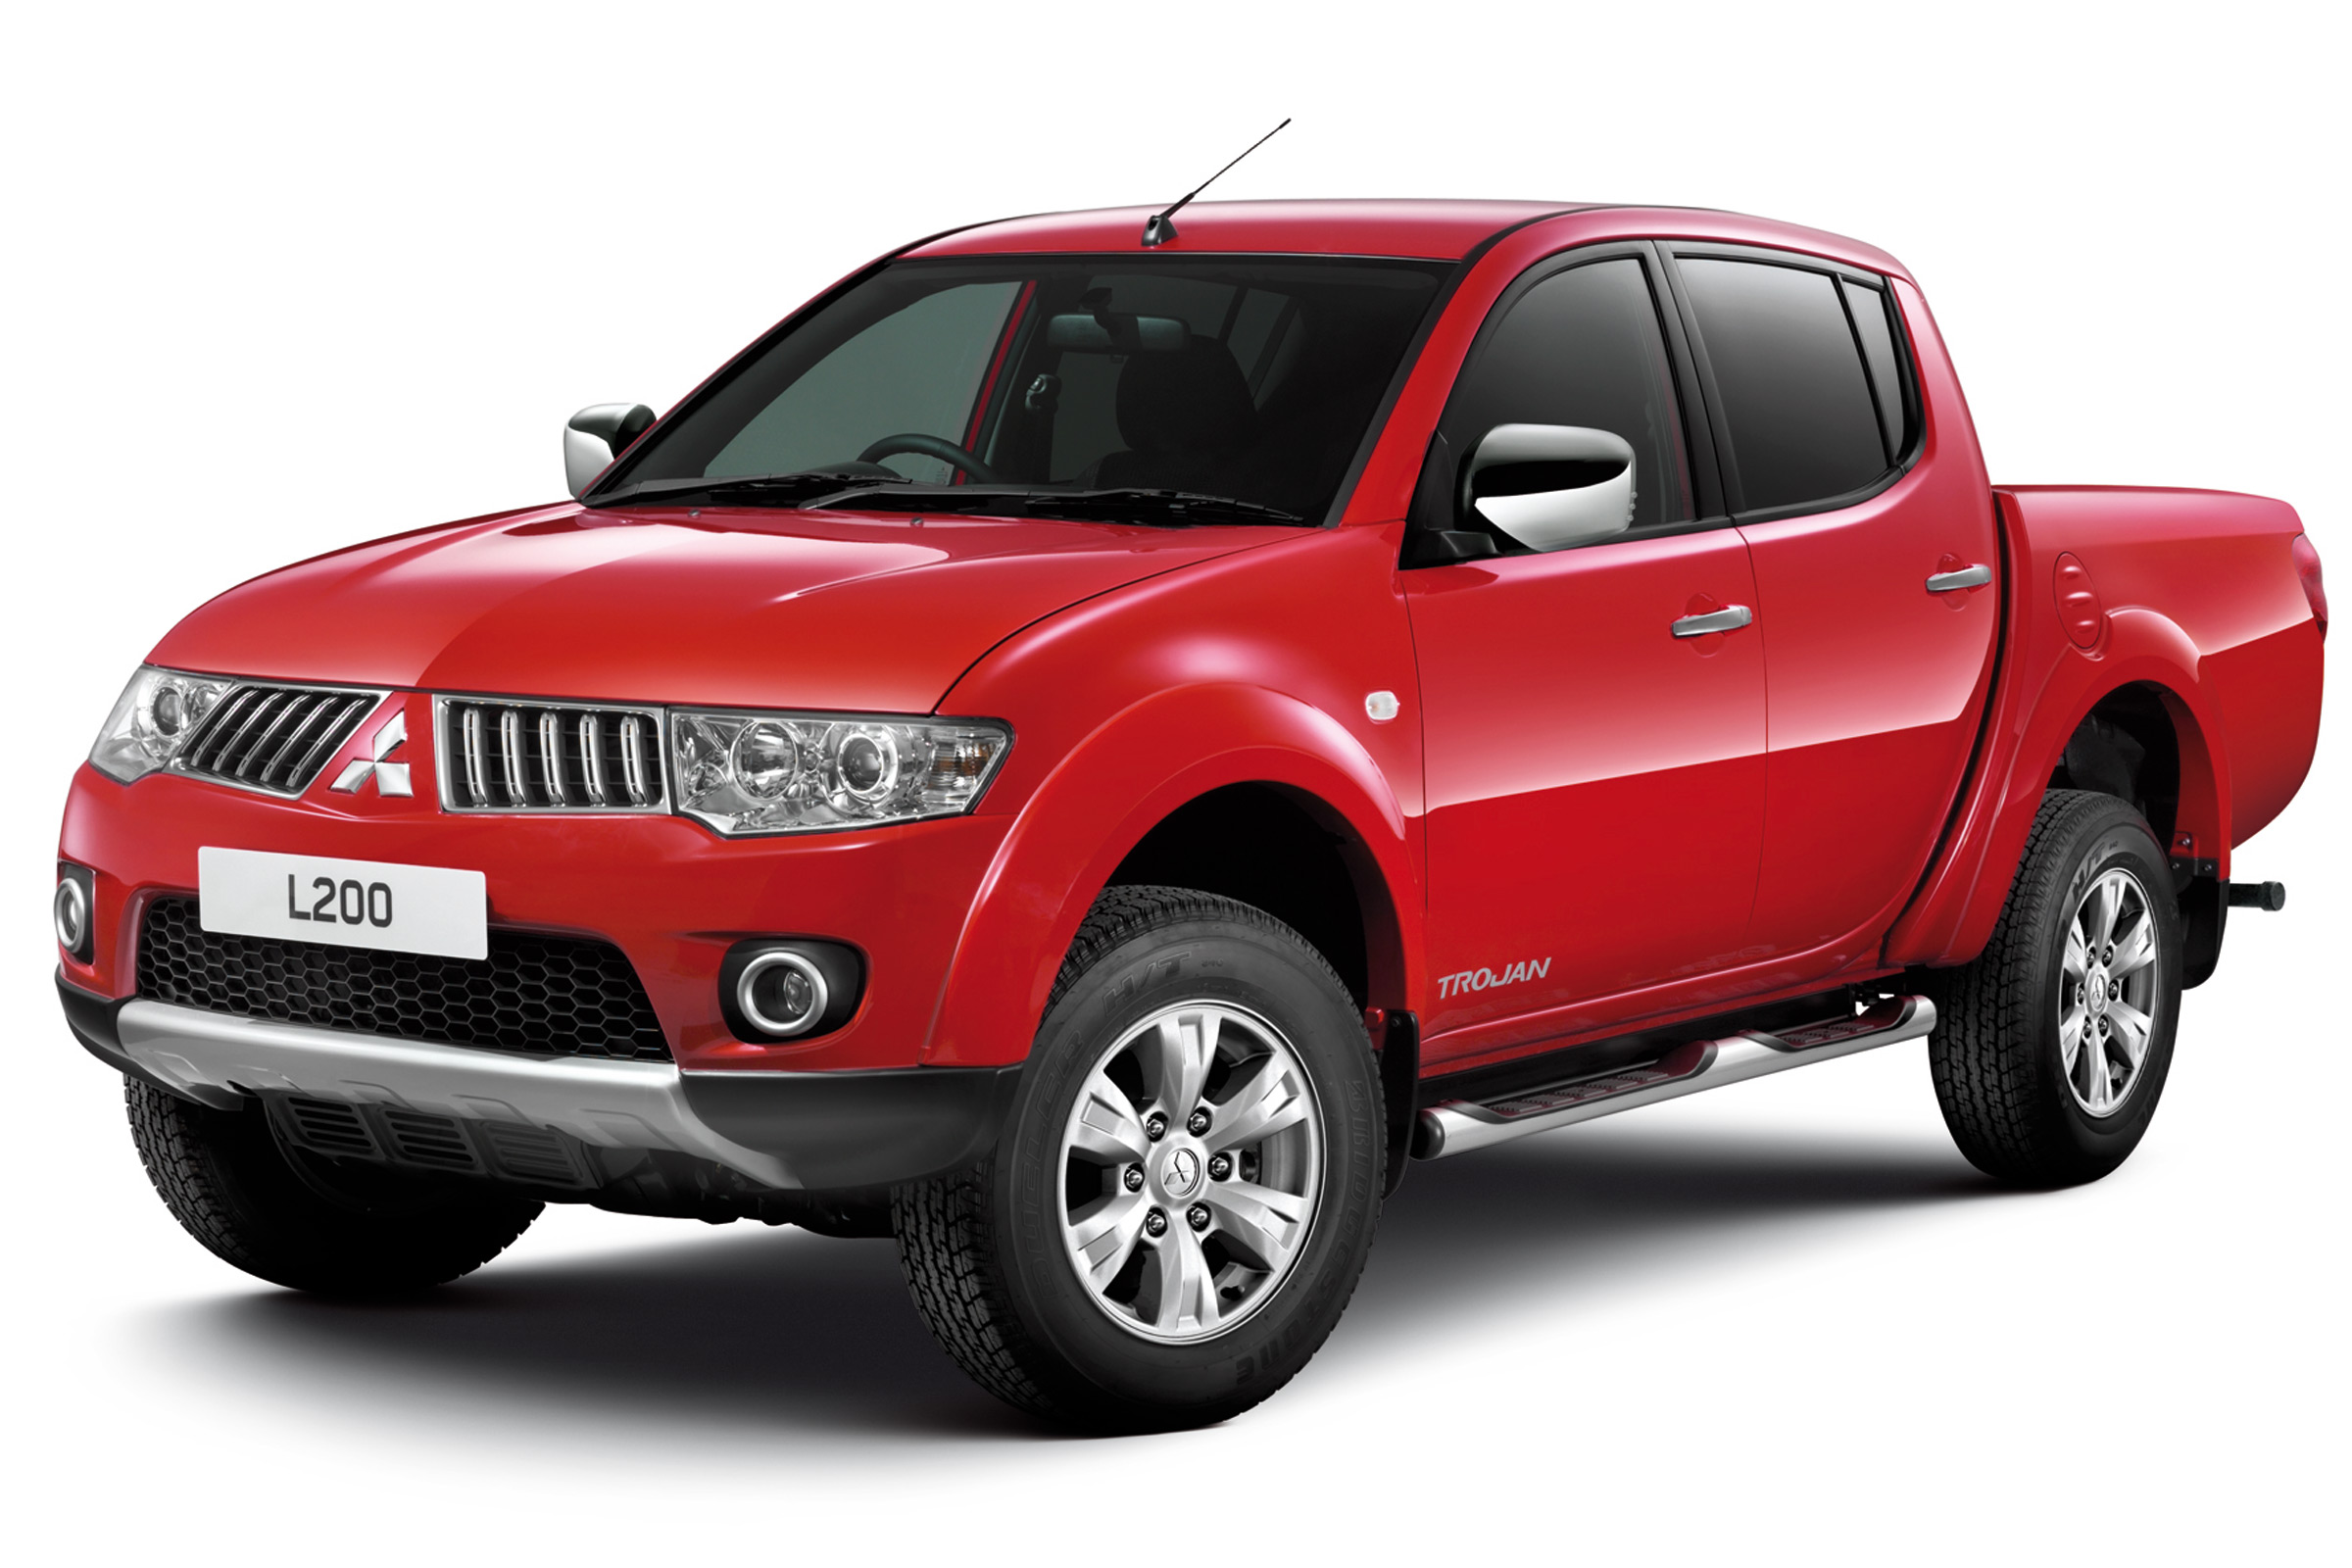 Download Mitsubishi L200 Suv Owner Reviews Mpg Problems Reliability Carbuyer PSD Mockup Templates